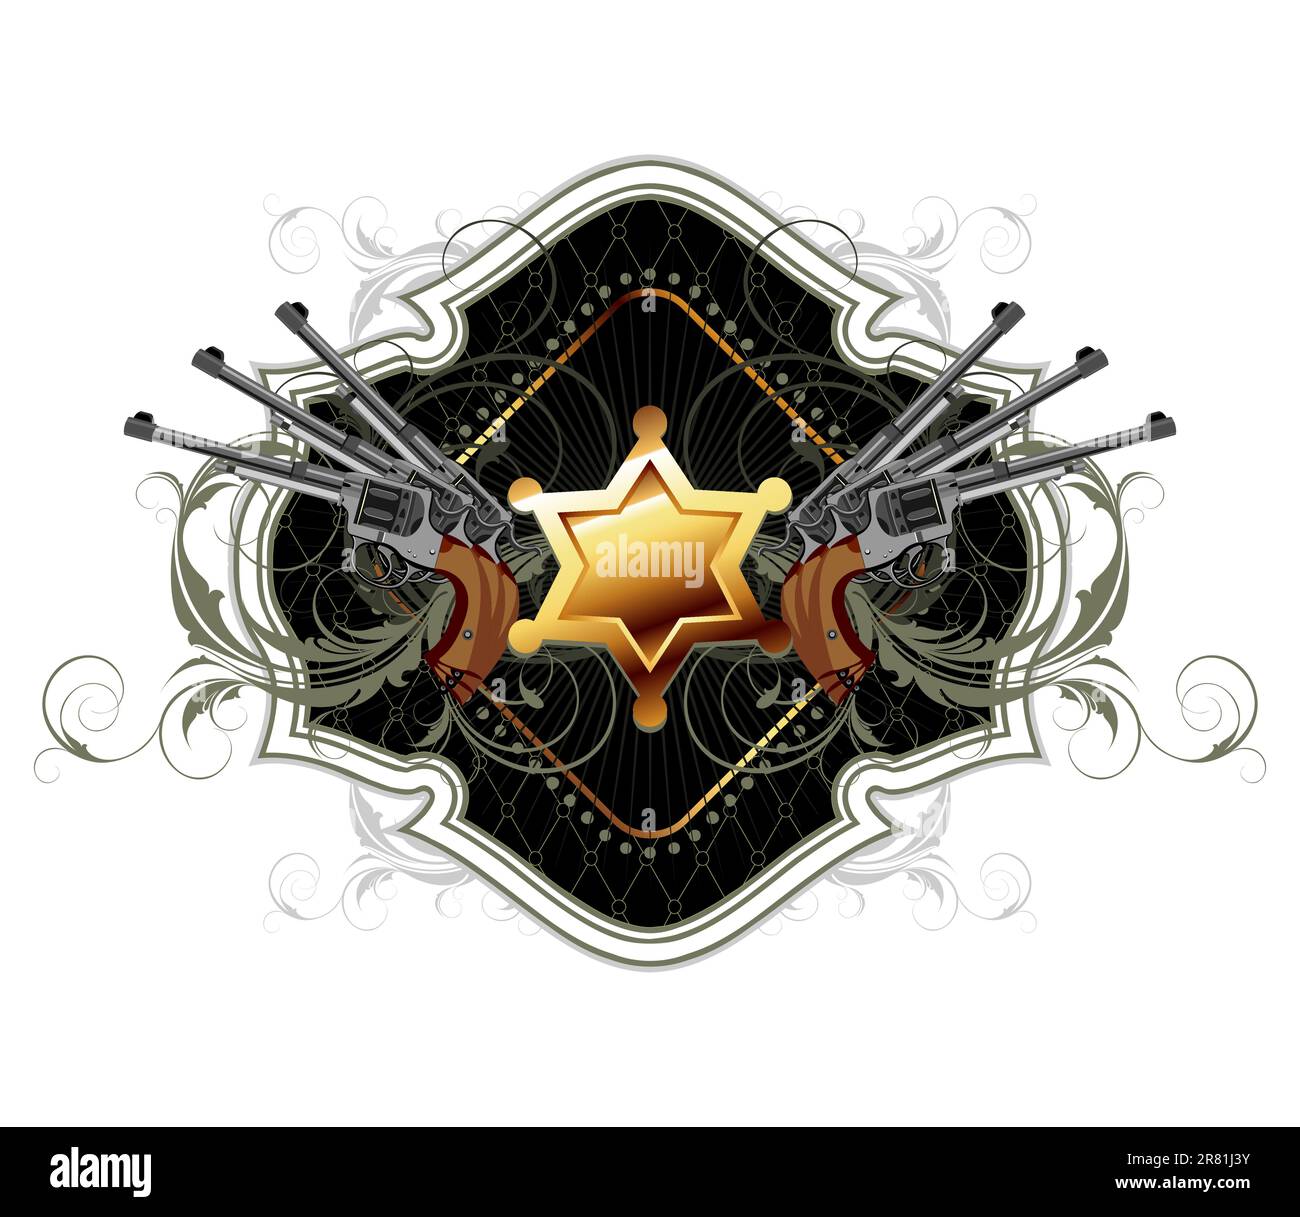 sheriff star with guns ornate frame, this illustration may be useful as designer work Stock Vector